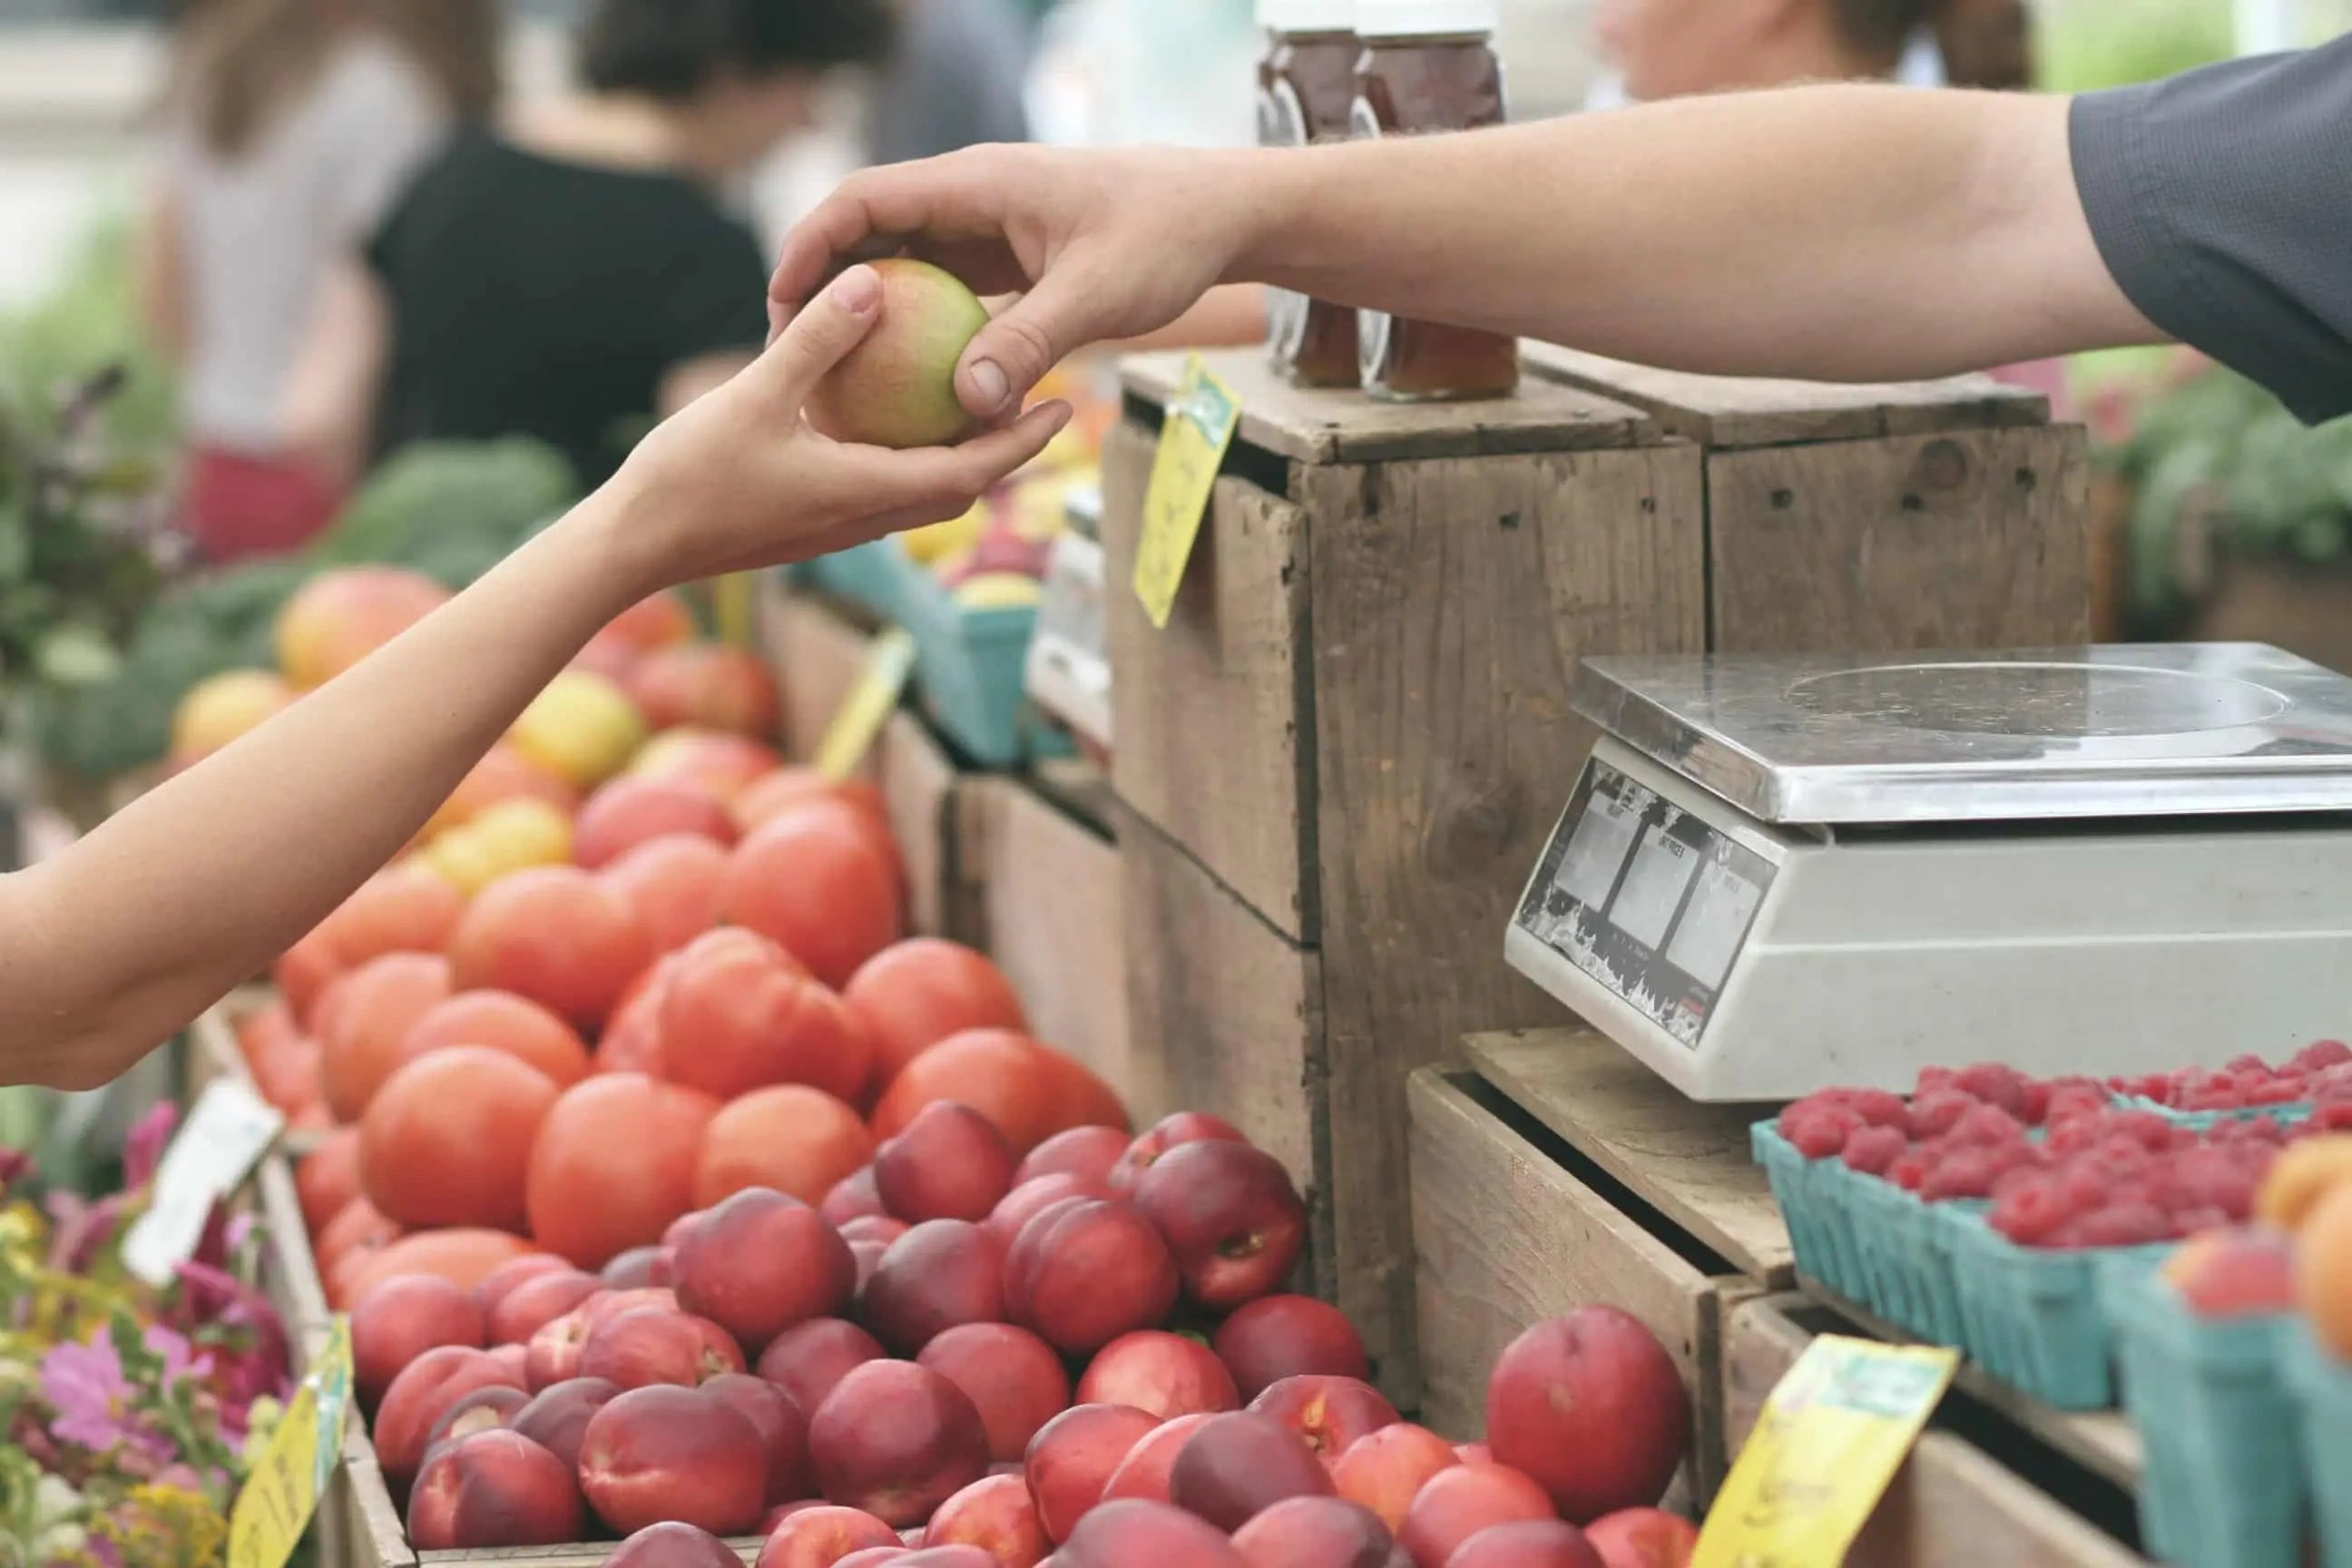 Nature’s grocery stores: 10 reasons we love farmers markets